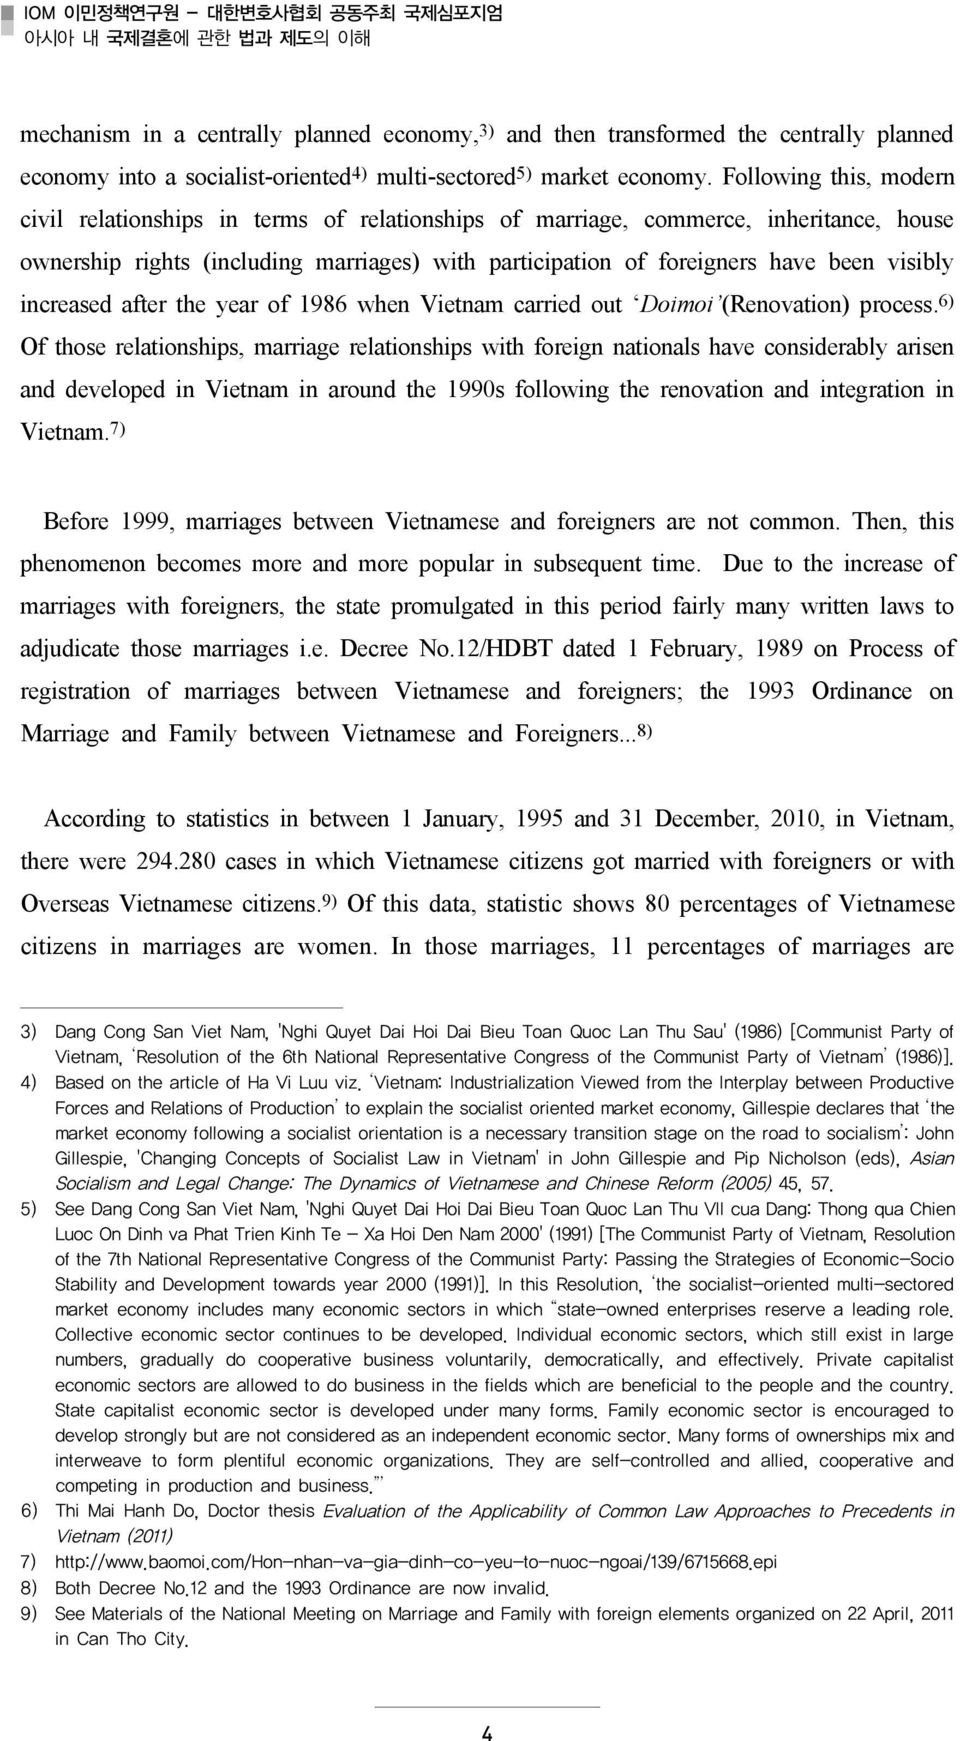 Following this, modern civil relationships in terms of relationships of marriage, commerce, inheritance, house ownership rights (including marriages) with participation of foreigners have been